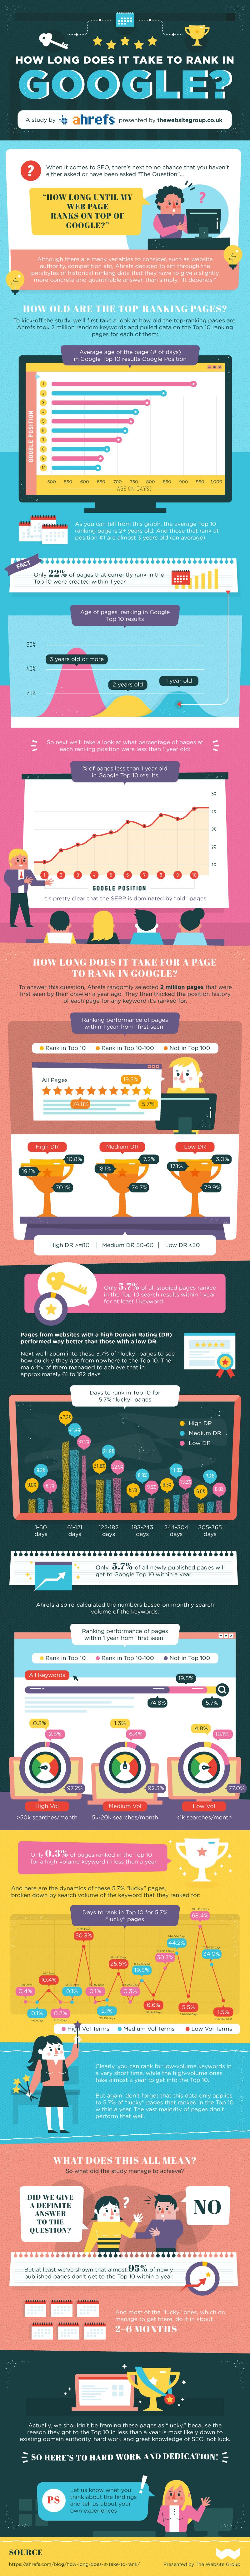 How Long to Rank on Google Infographic